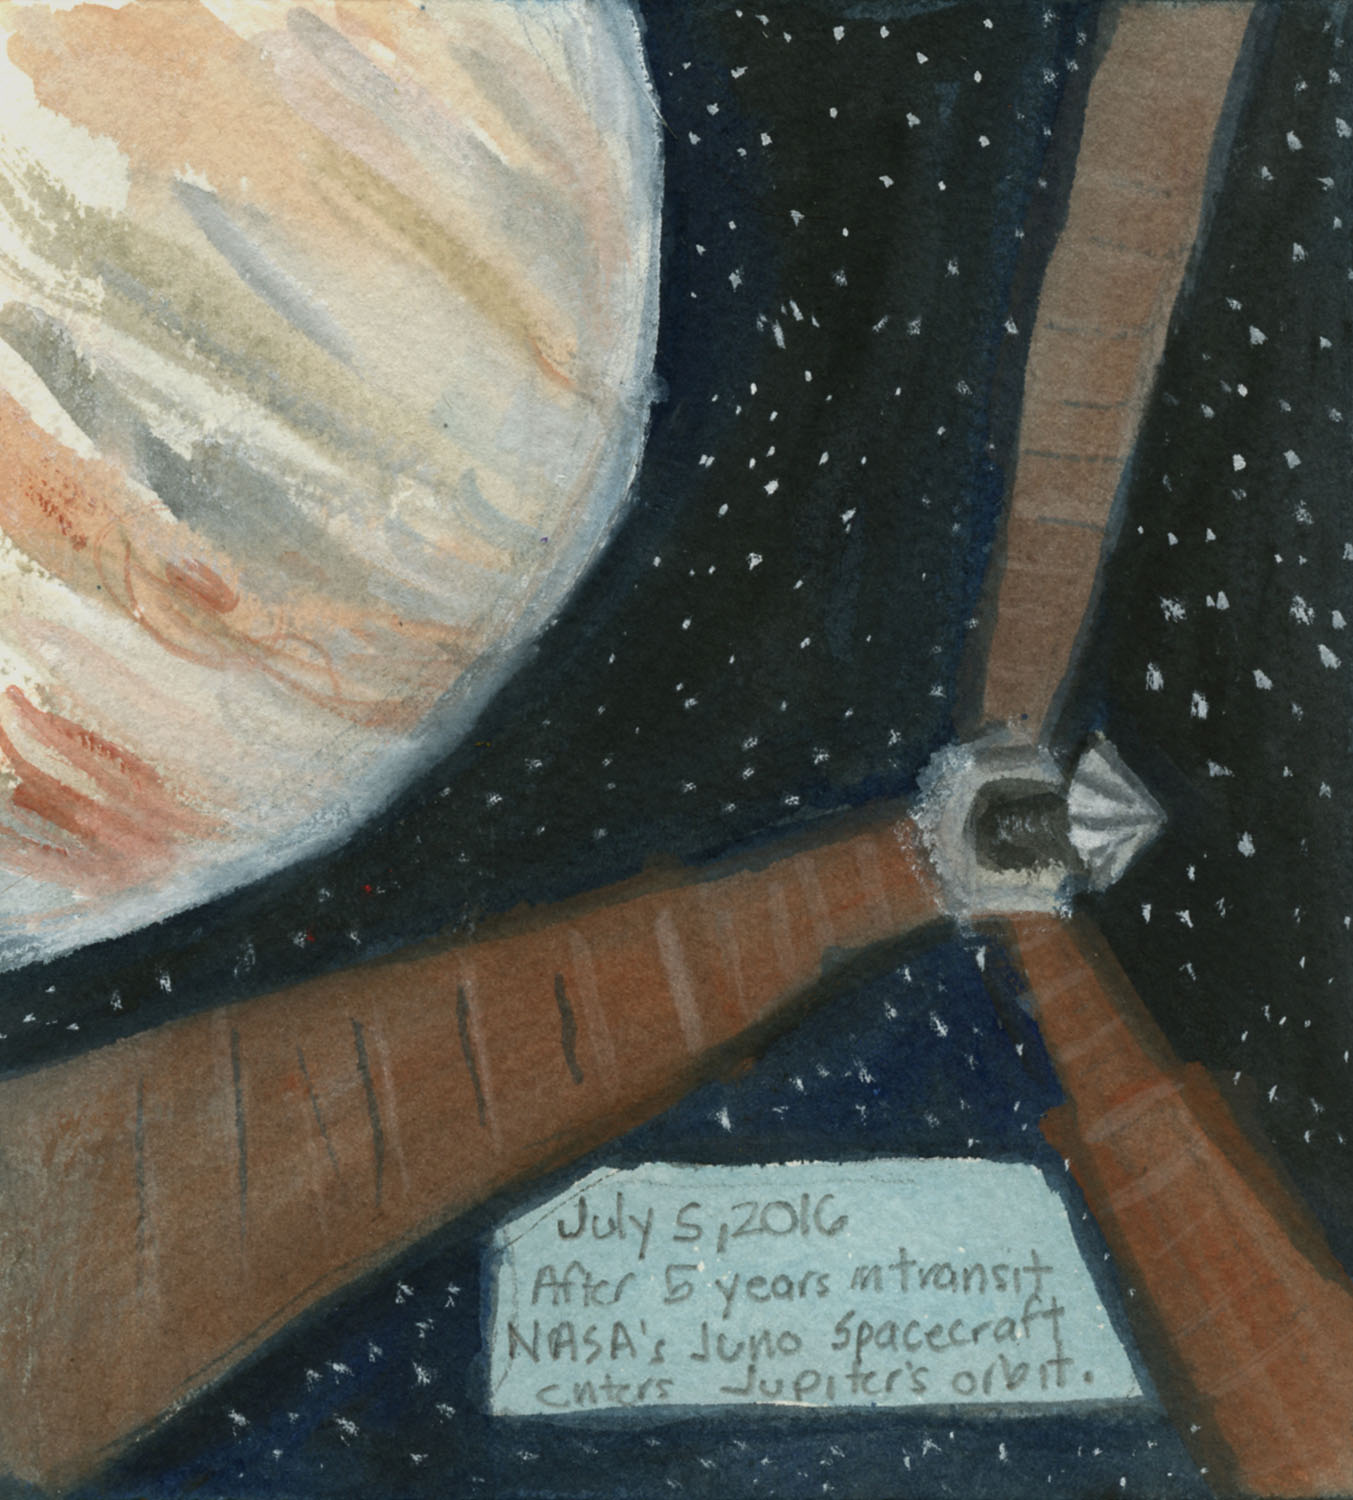 Day 227 (July 5, 2016)<br>Watercolor, gouache, graphite, on paper, 6 x 5 ½ in.<br><i>After 5 years in transit NASA’s Juno spacecraft enters Jupiter’s orbit.</i>